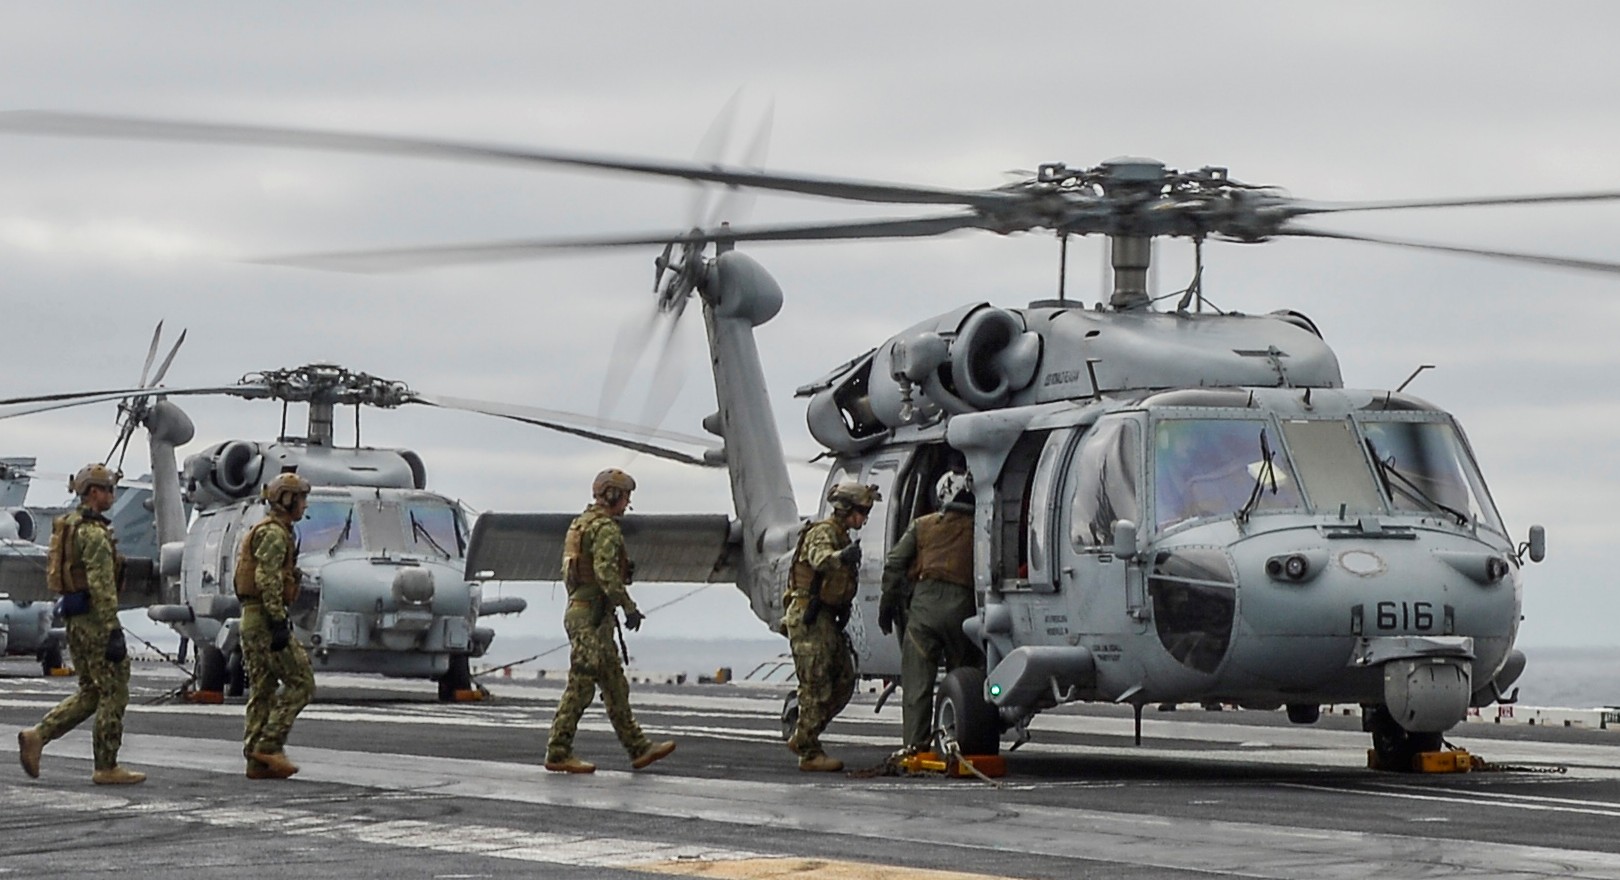 hsc-4 black knights helicopter sea combat squadron us navy mh-60s seahawk 2015 28 carrier air wing cvw-2 uss ronald reagan cvn-76